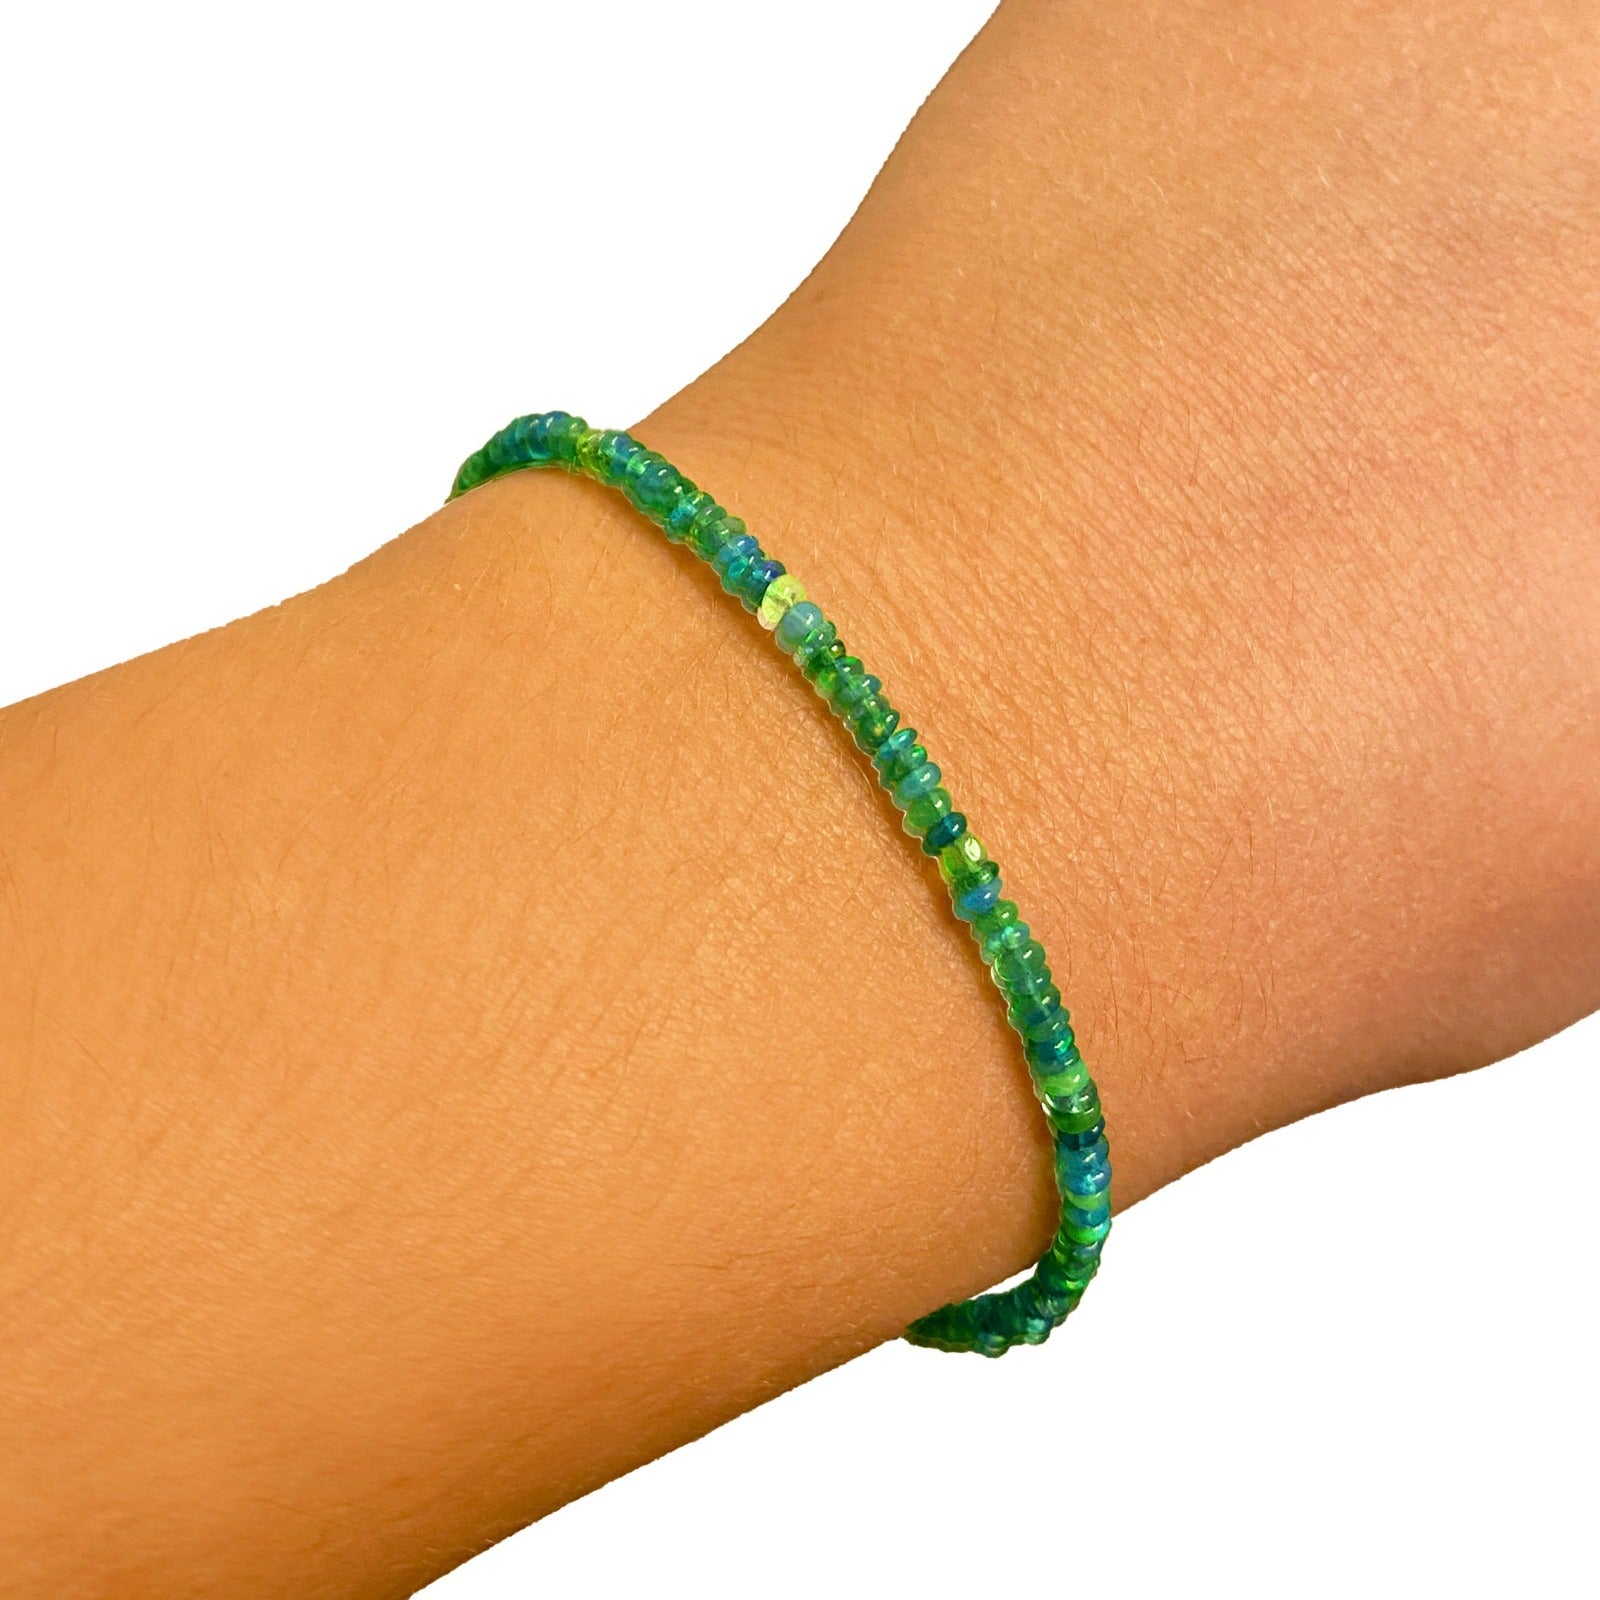 Shimmering beaded bracelet made of smooth opals in shades of green on a gold linking lobster clasp.